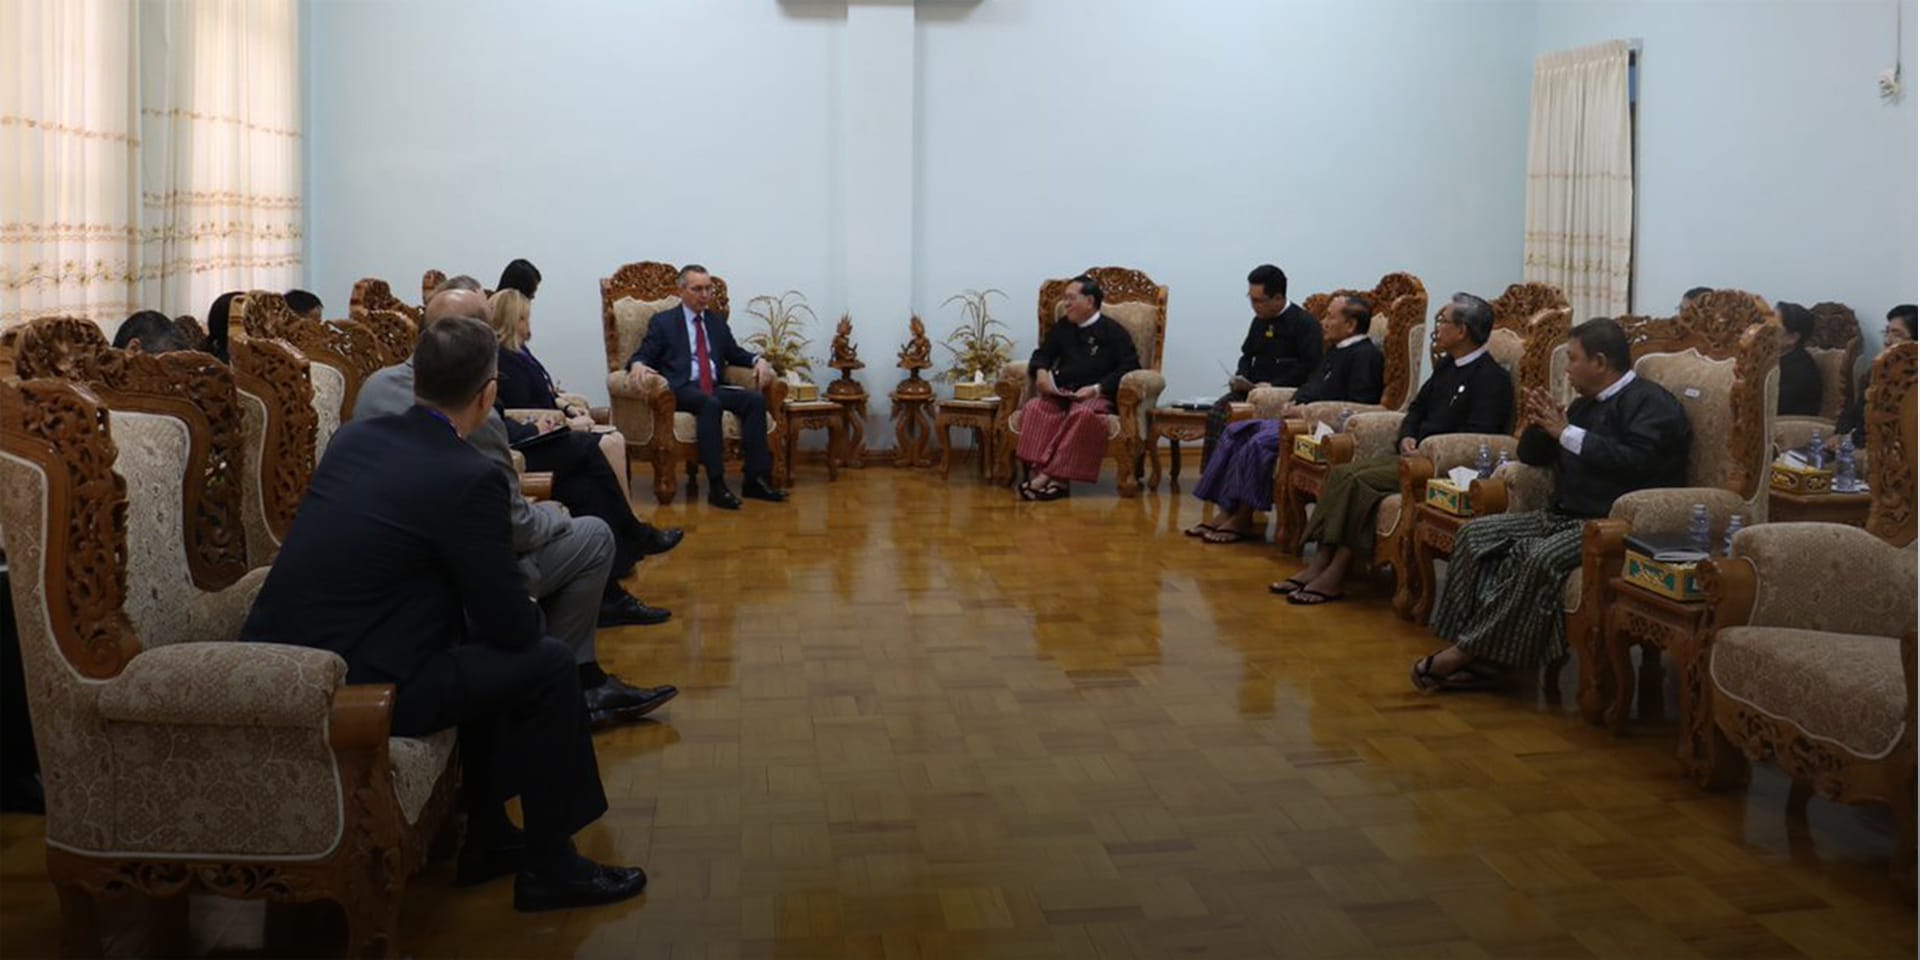 Image of several people in a circle, sitting in elegant chairs and having a discussion.